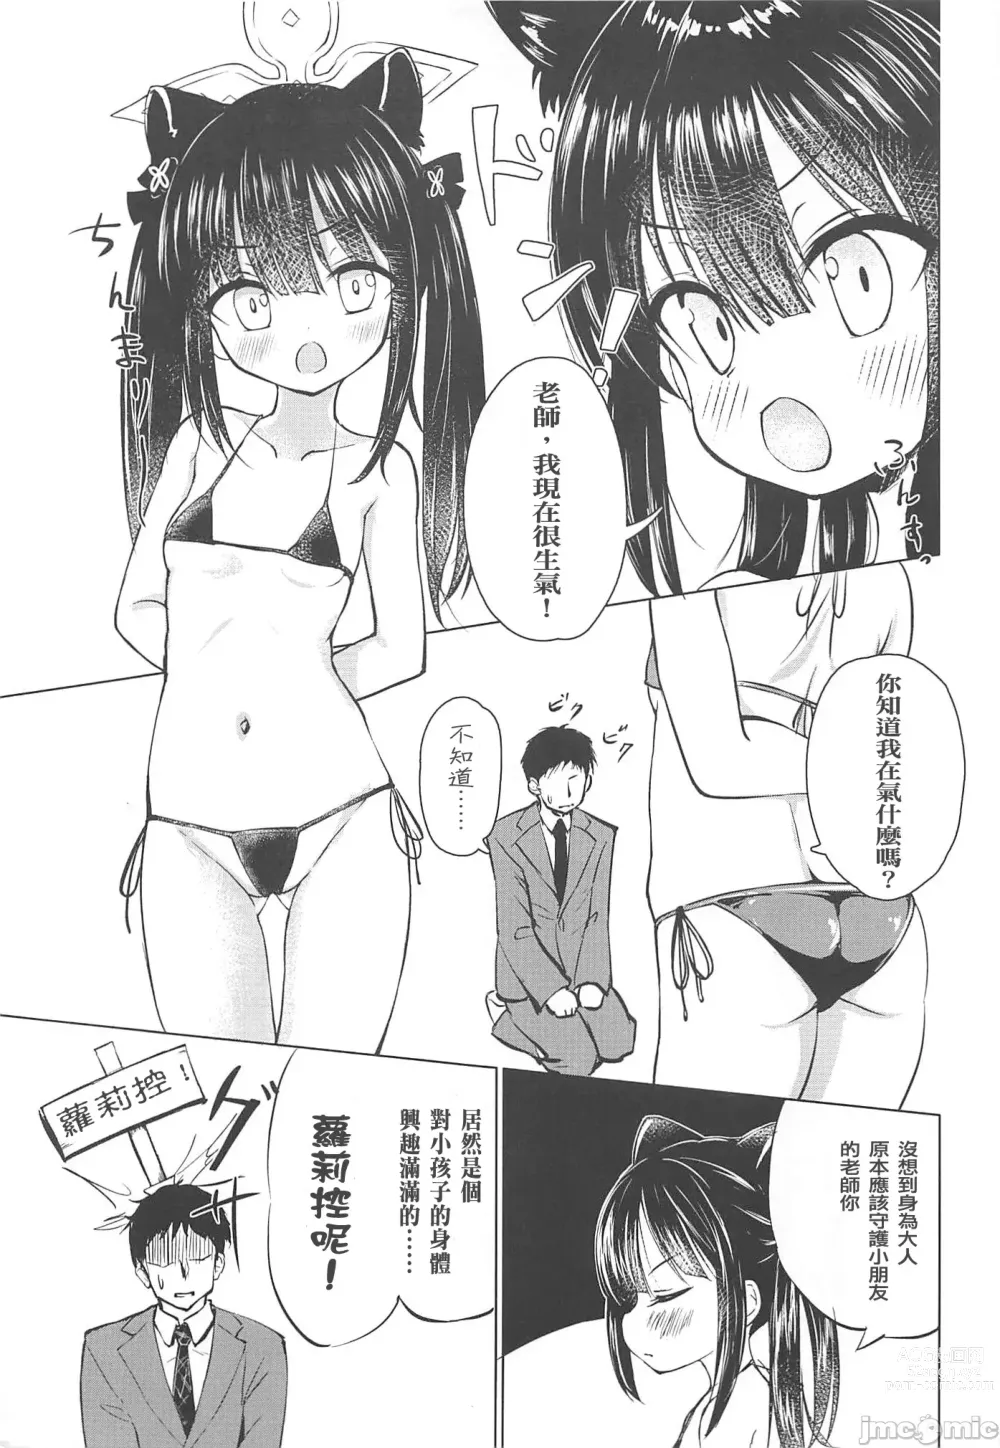 Page 4 of doujinshi Youjo Archive